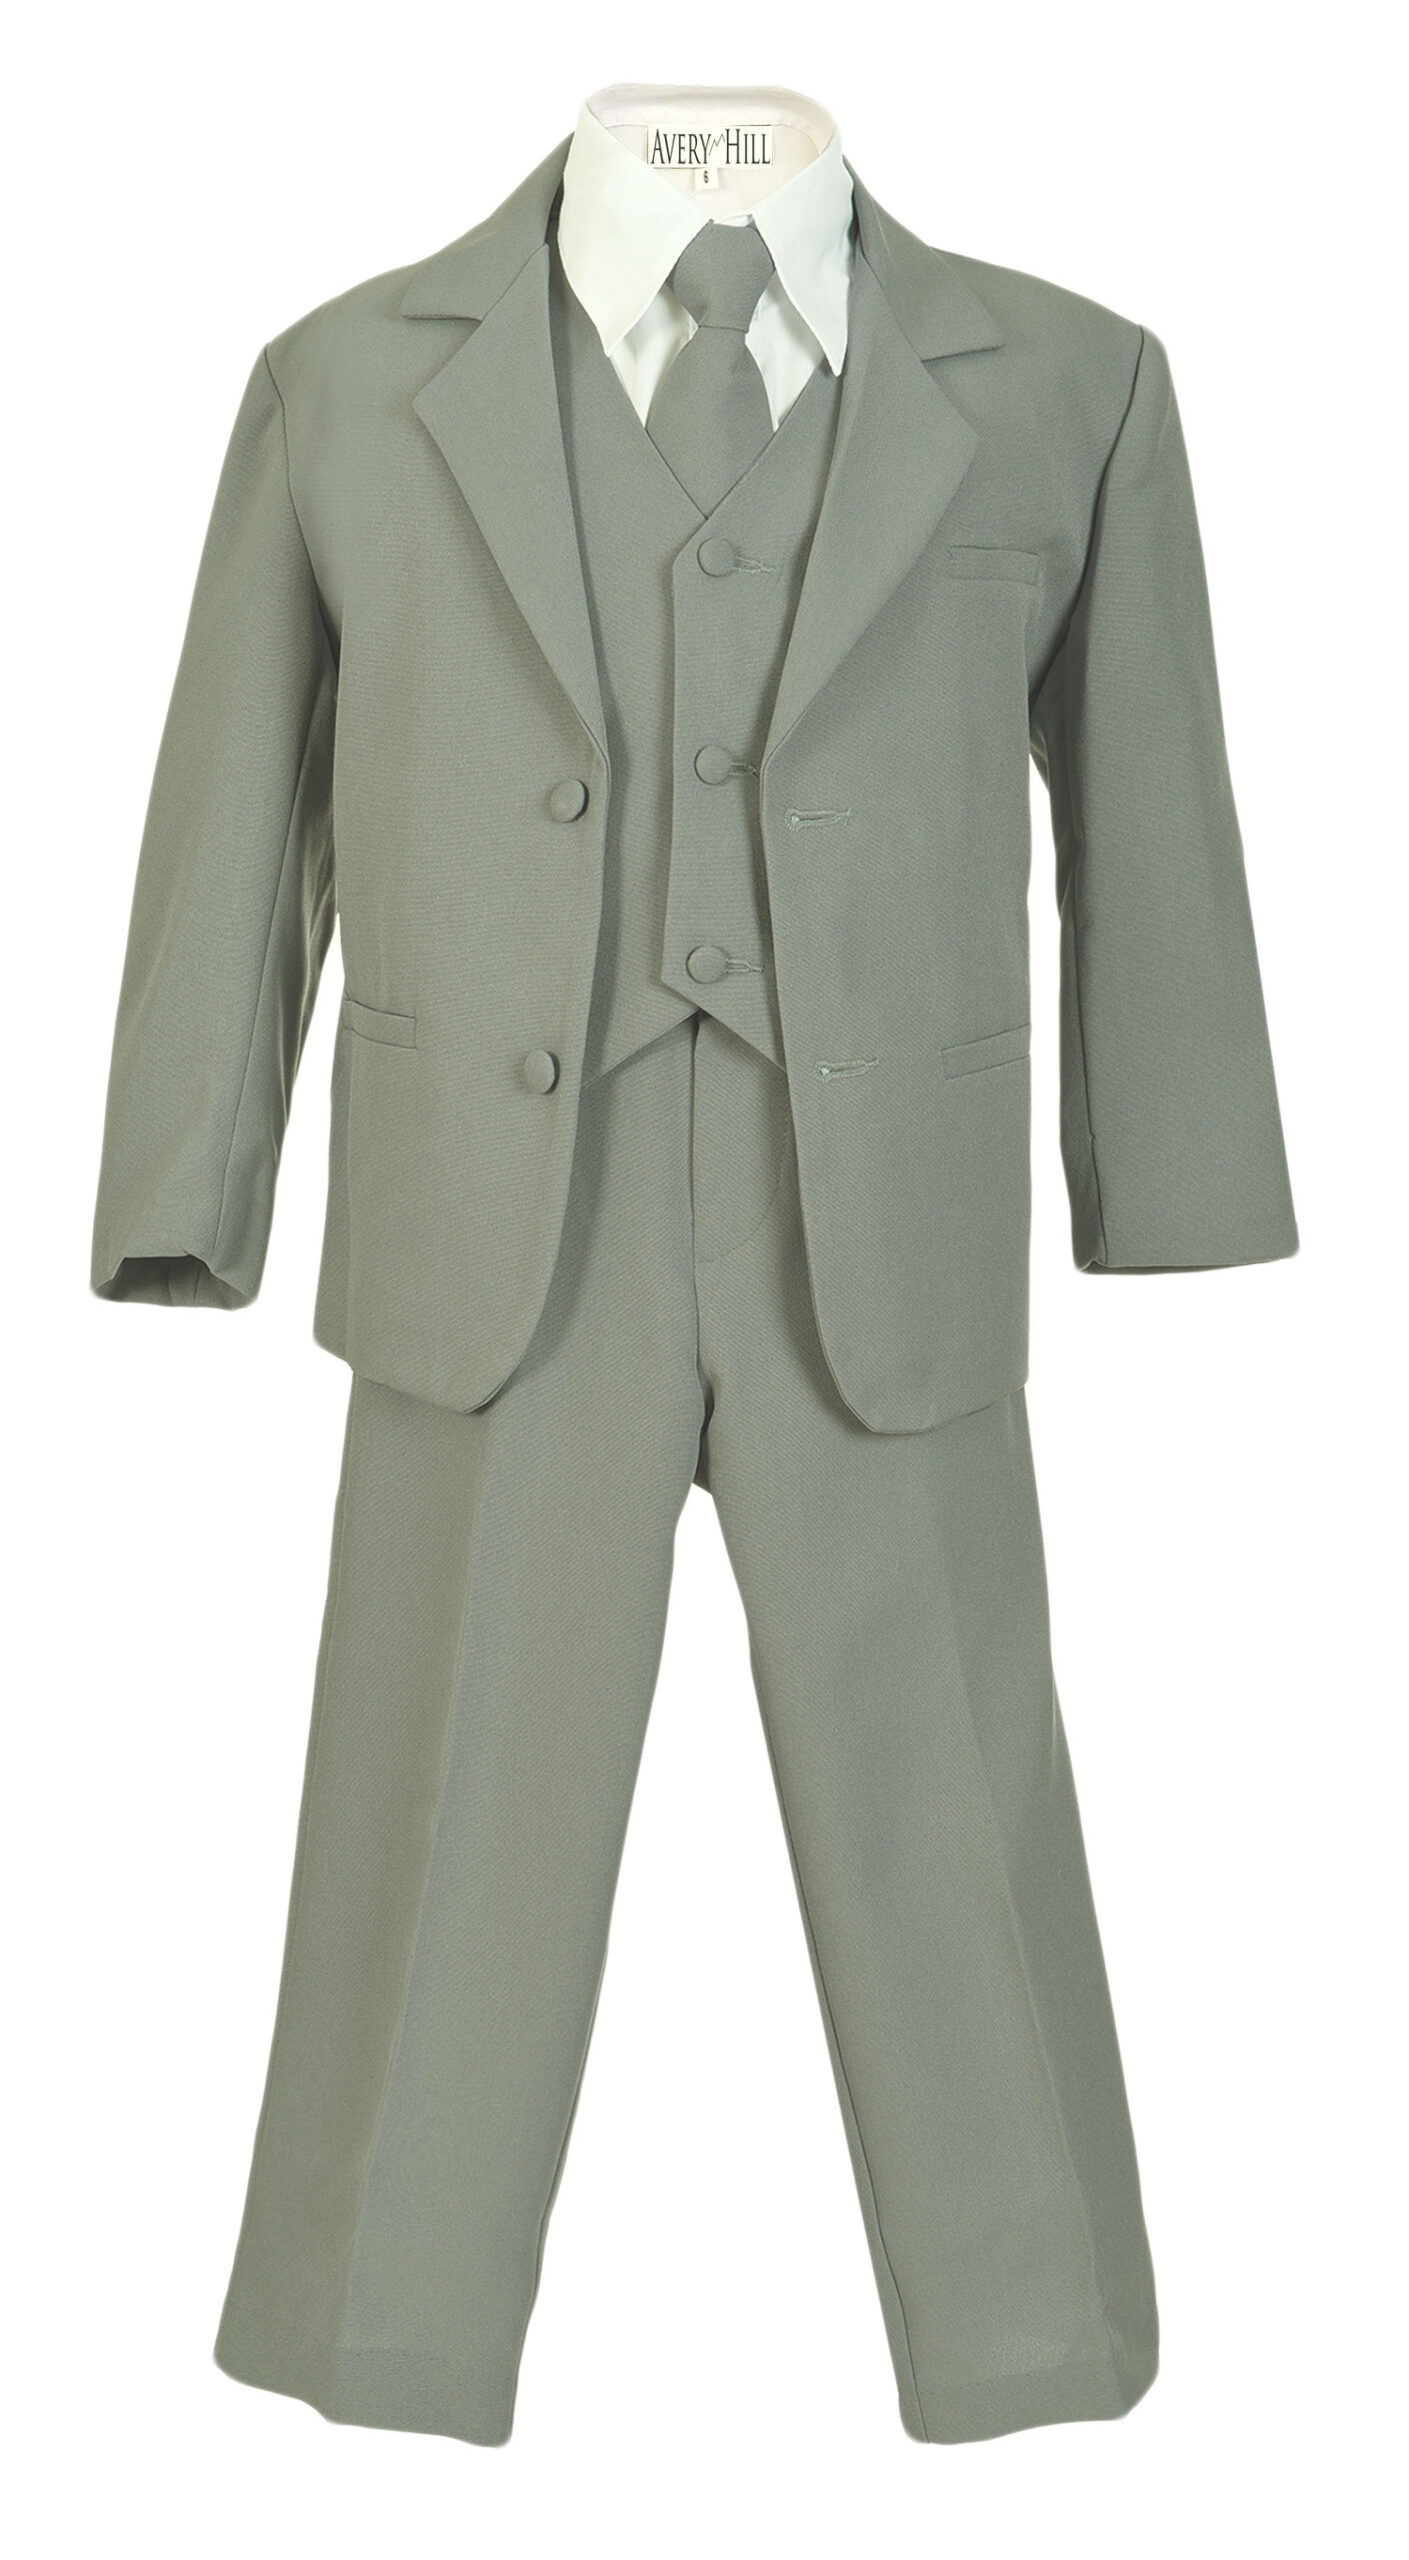 Avery Hill Boys Formal 5 Piece Suit with Shirt and Vest Silver White - M